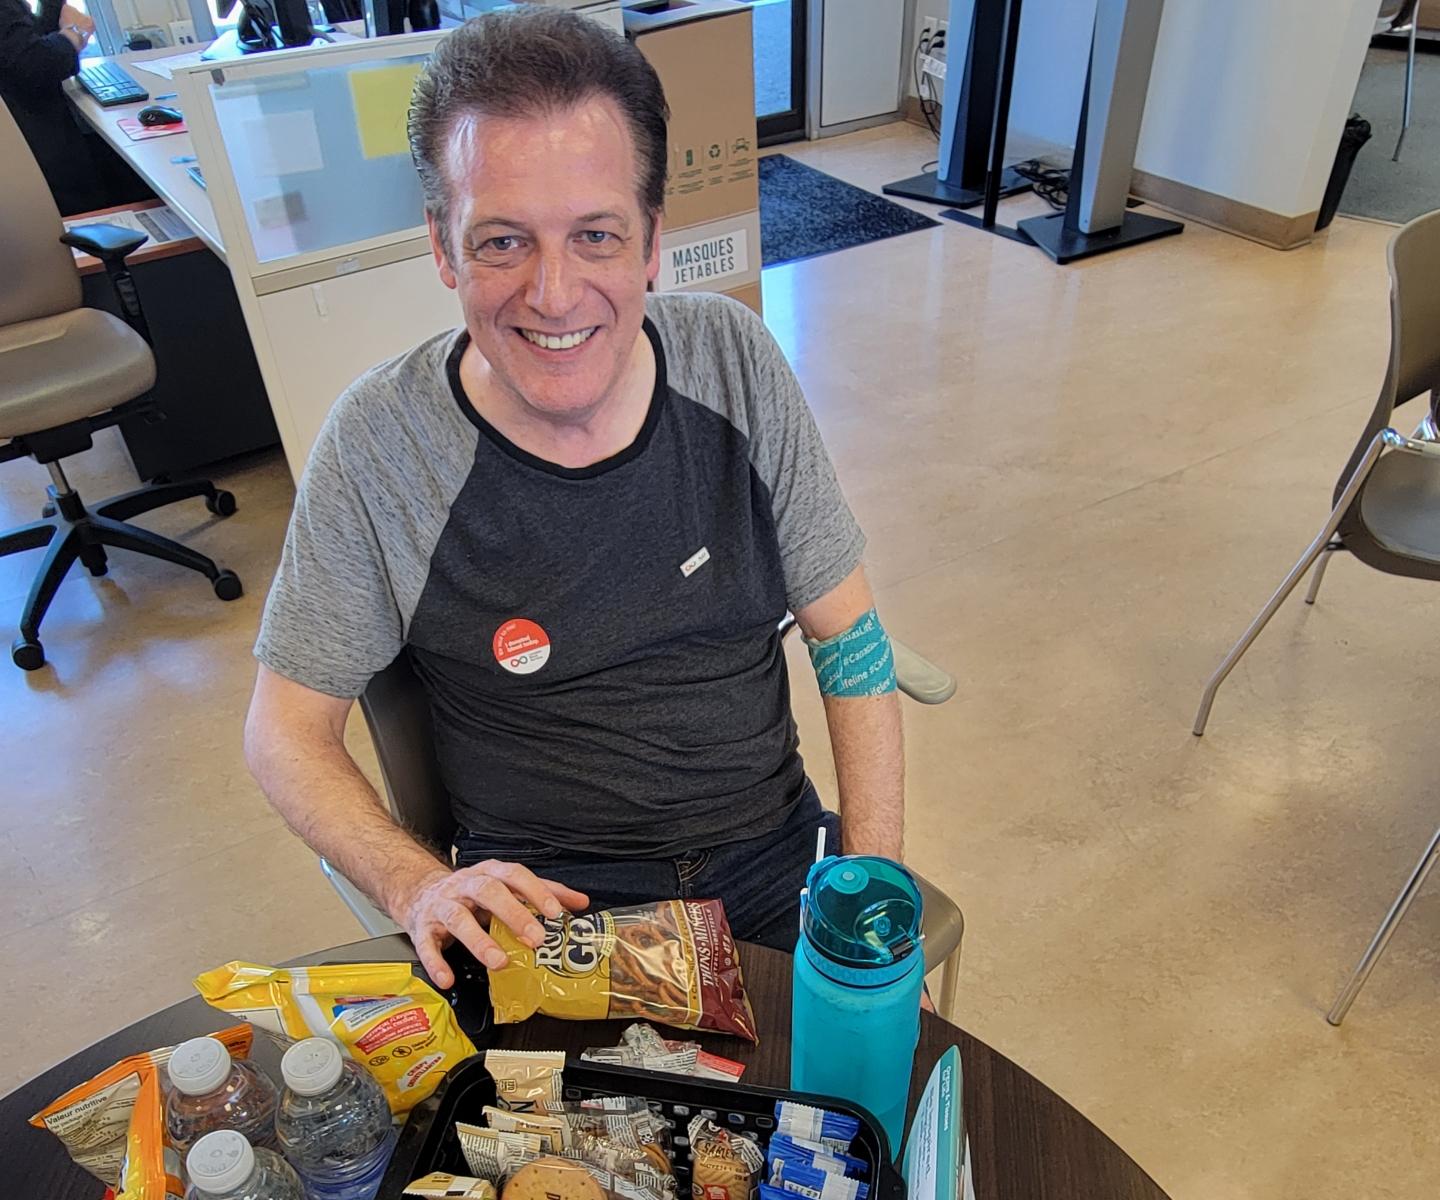 Blood donor in donor centre with snacks and water bottle